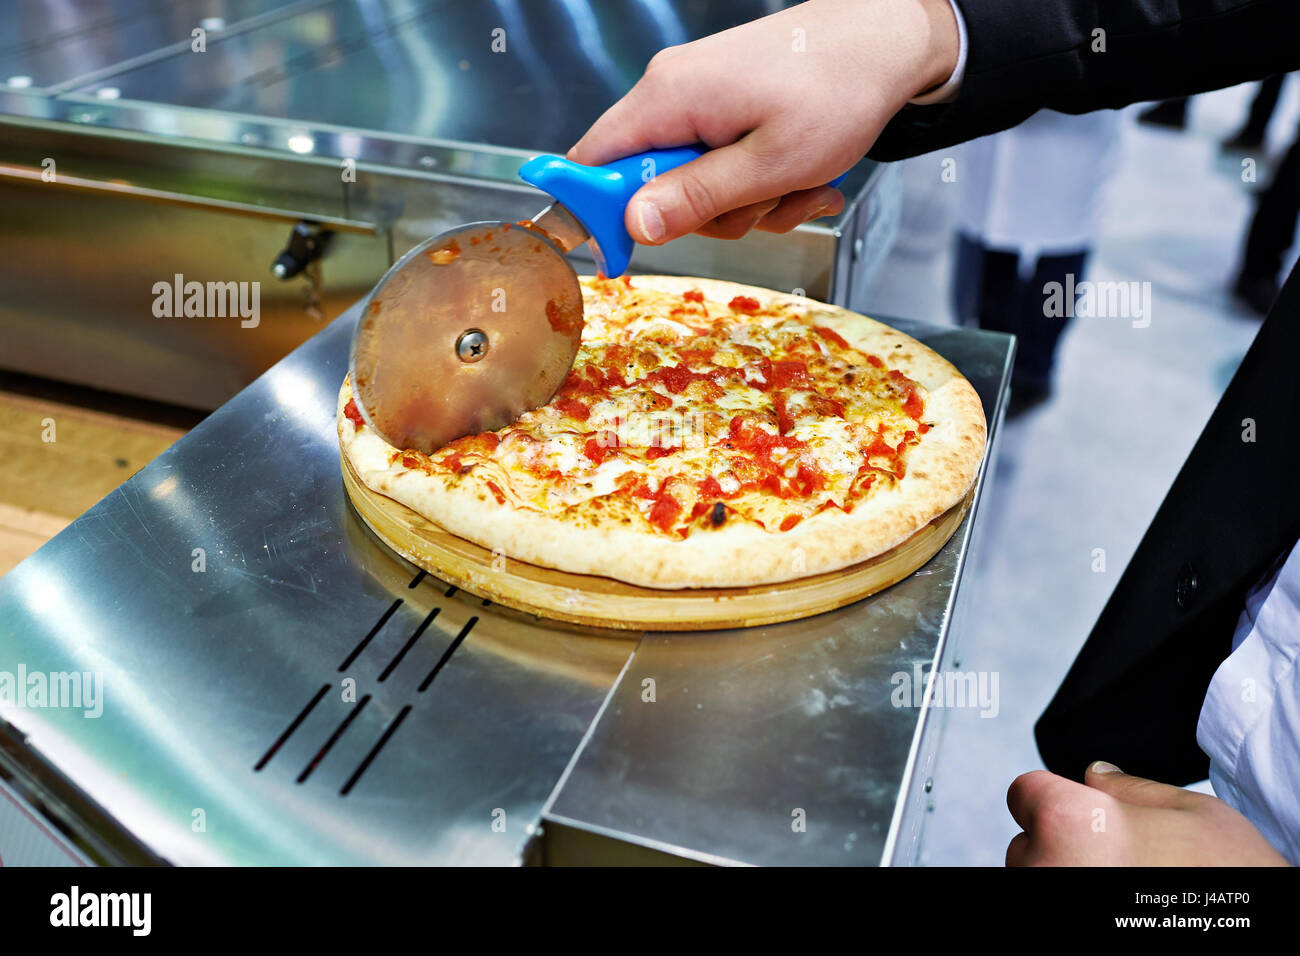 Man in a suit cuts a pizza Stock Photo